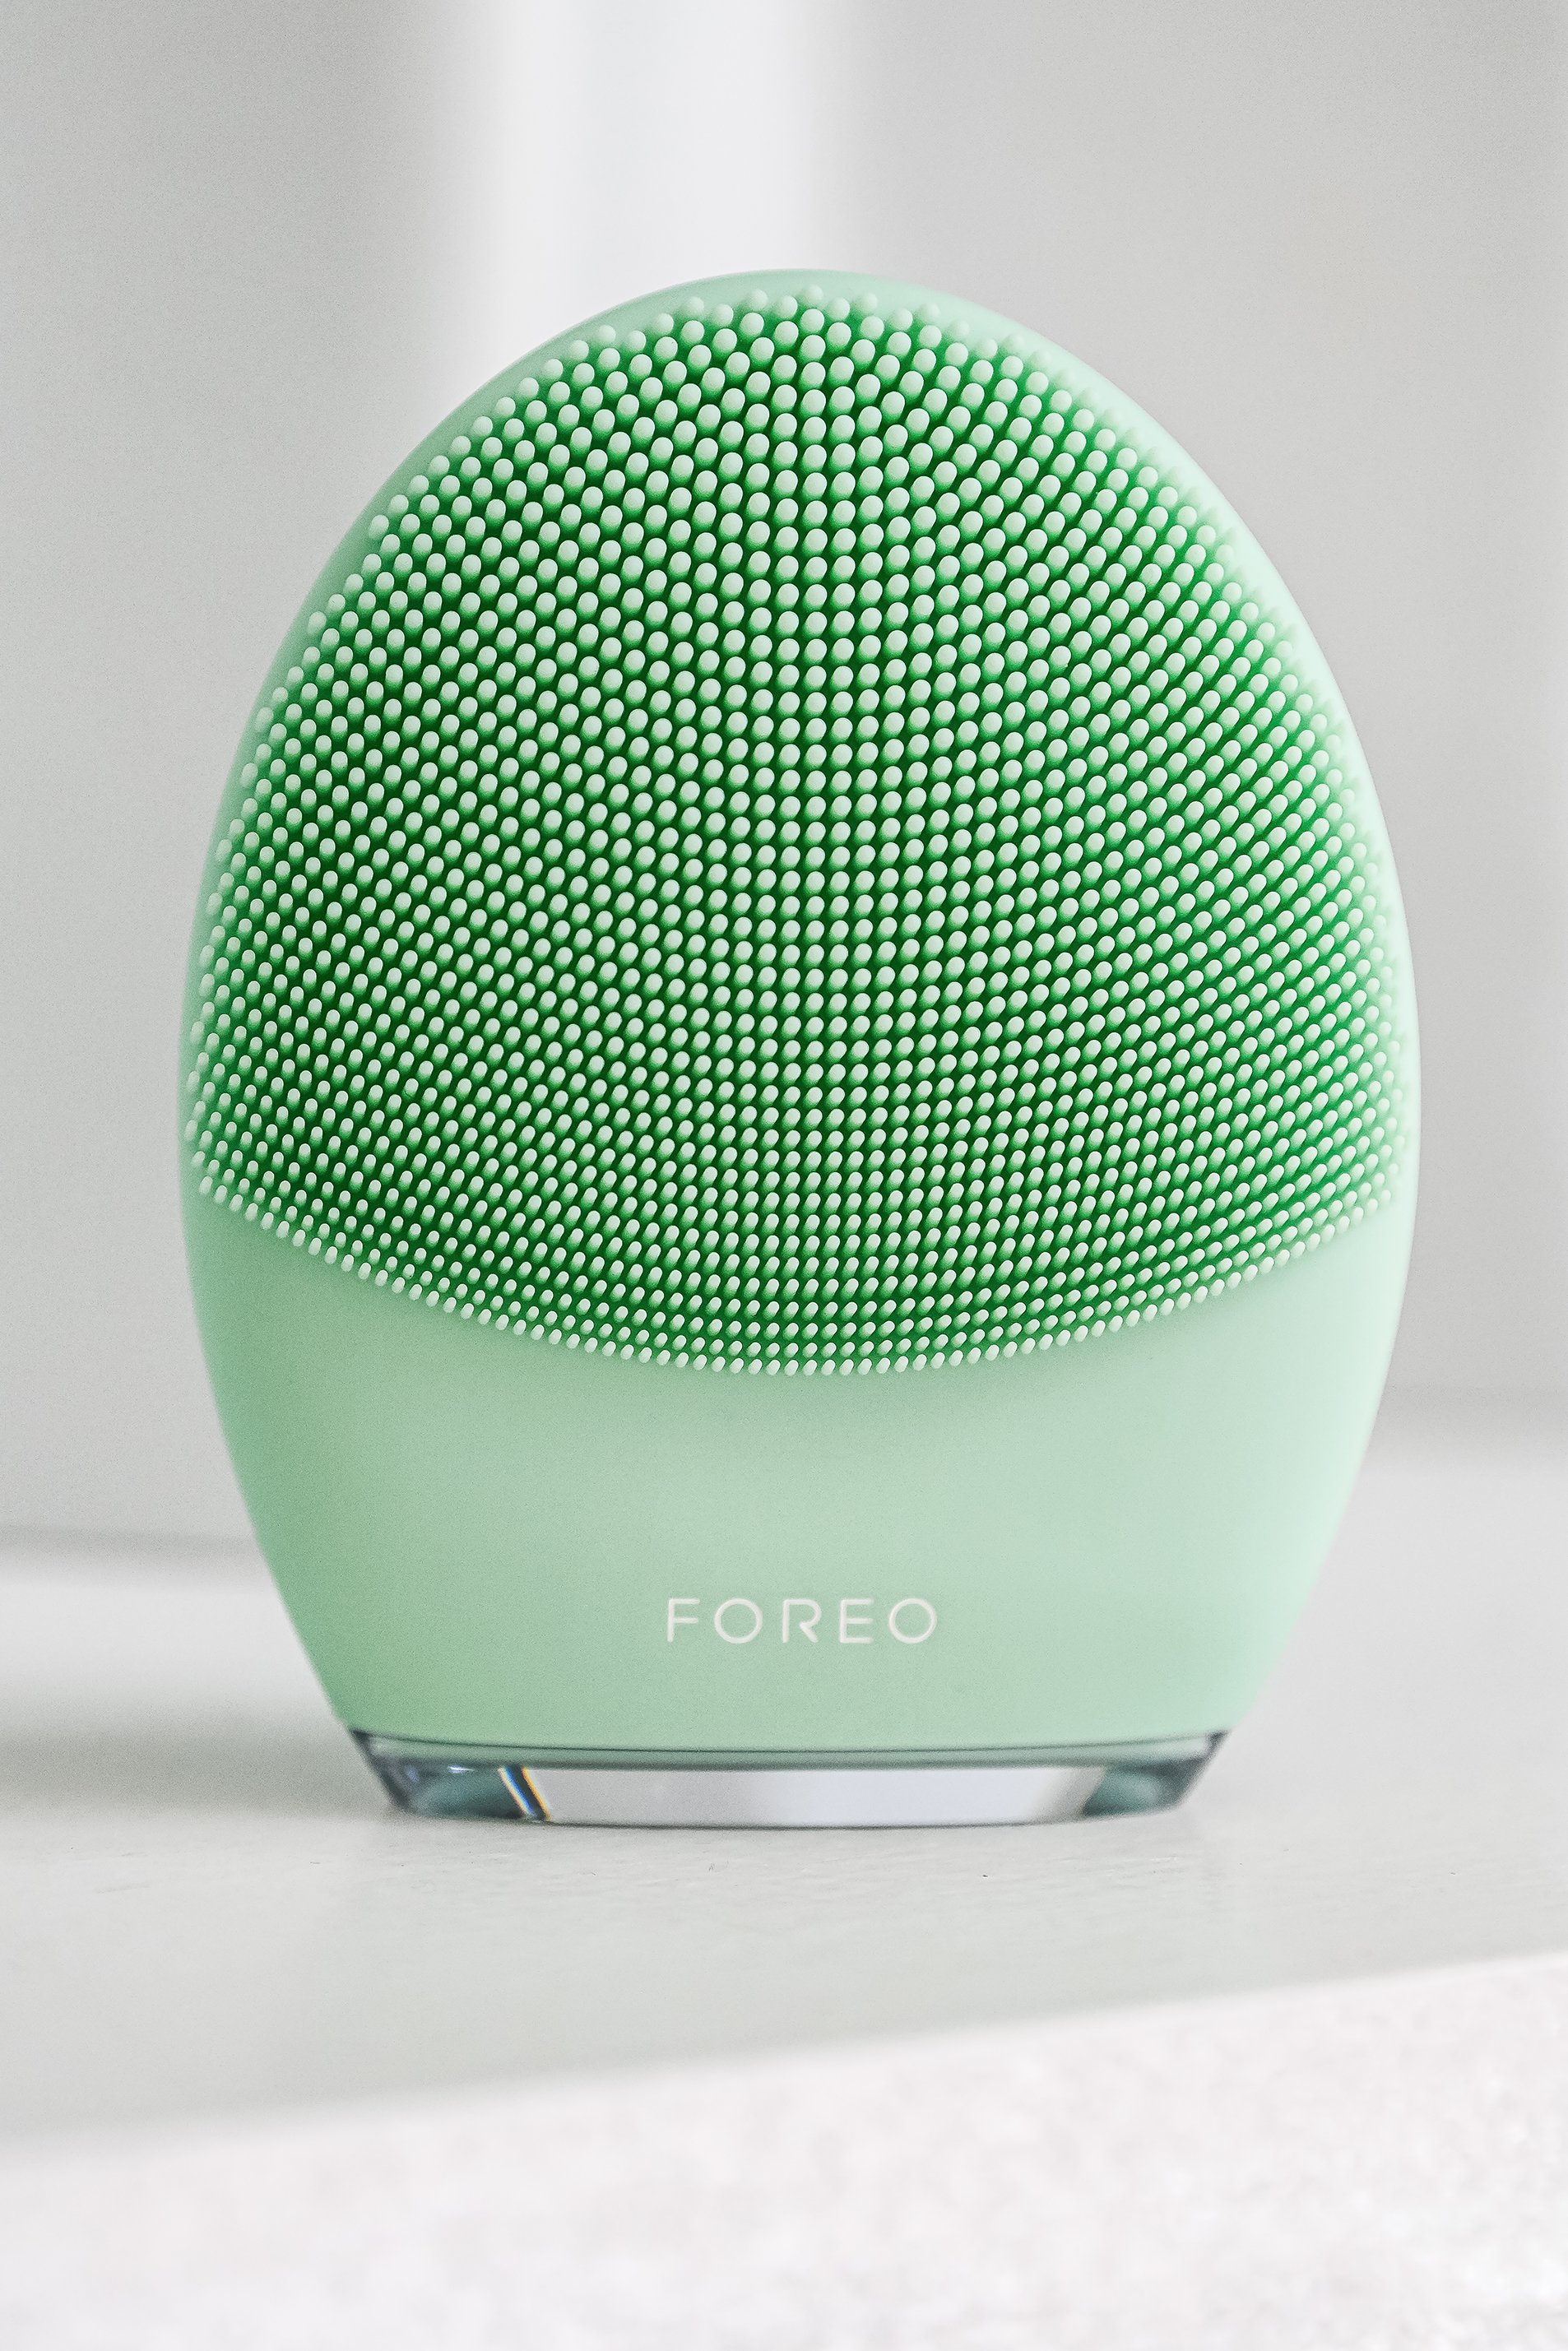 FOREO LUNA 4 - photo by Andrew Werner .jpg